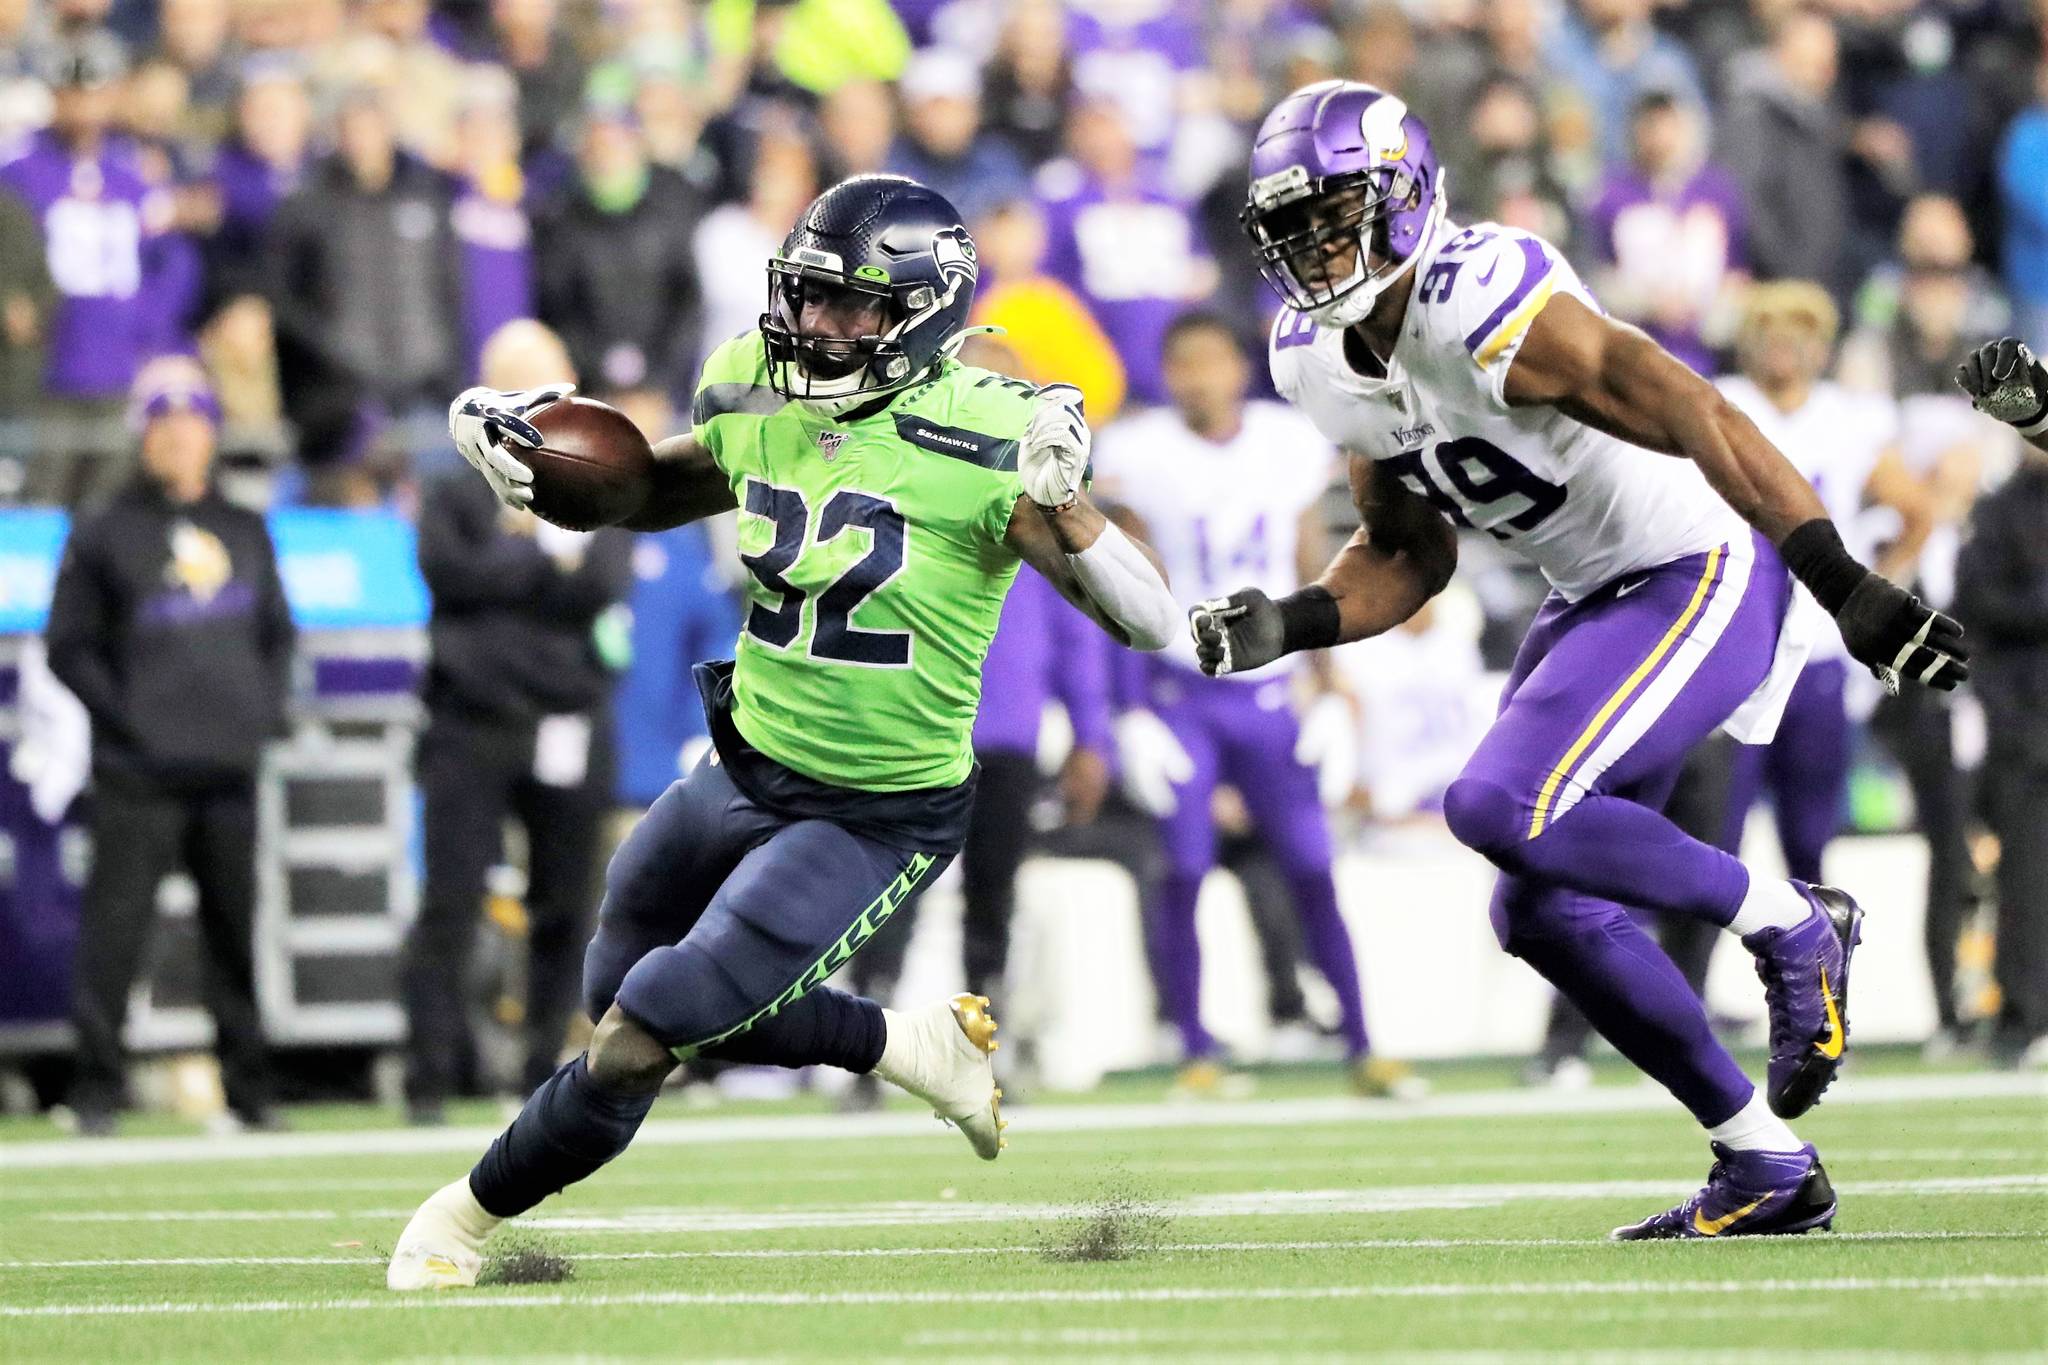 Seattle Seahawks’ Chris Carson runs on a 26-yard carry as Minnesota Vikings’ Danielle Hunter pursues during the second half of an NFL football game, Monday, Dec. 2, 2019, in Seattle. (AP Photo/Ted S. Warren)